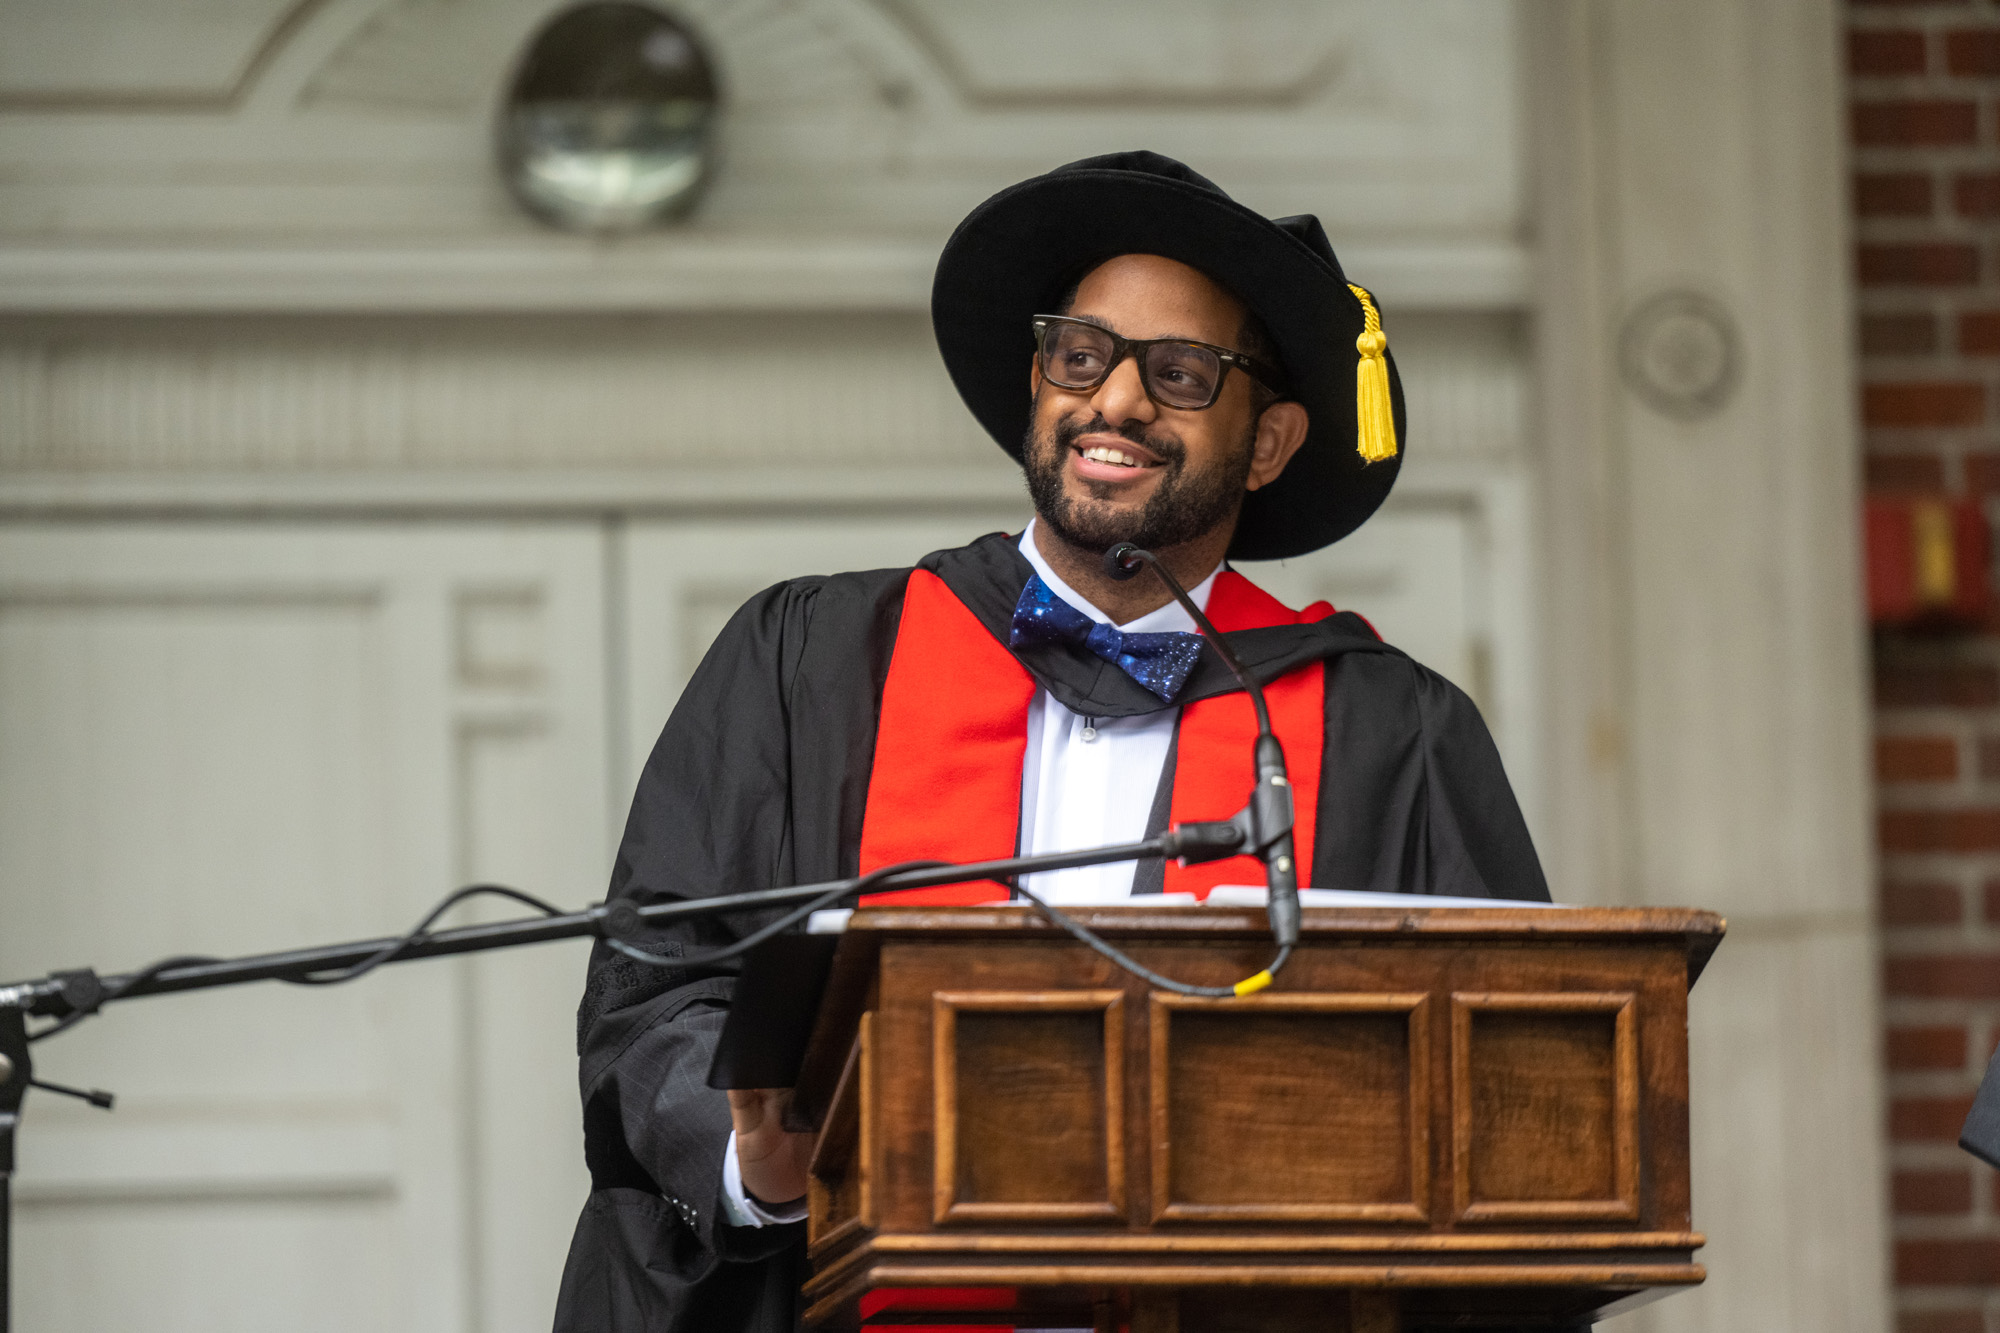 Commencement speaker, Keith Hawkins, stands at a podium to deliver an address